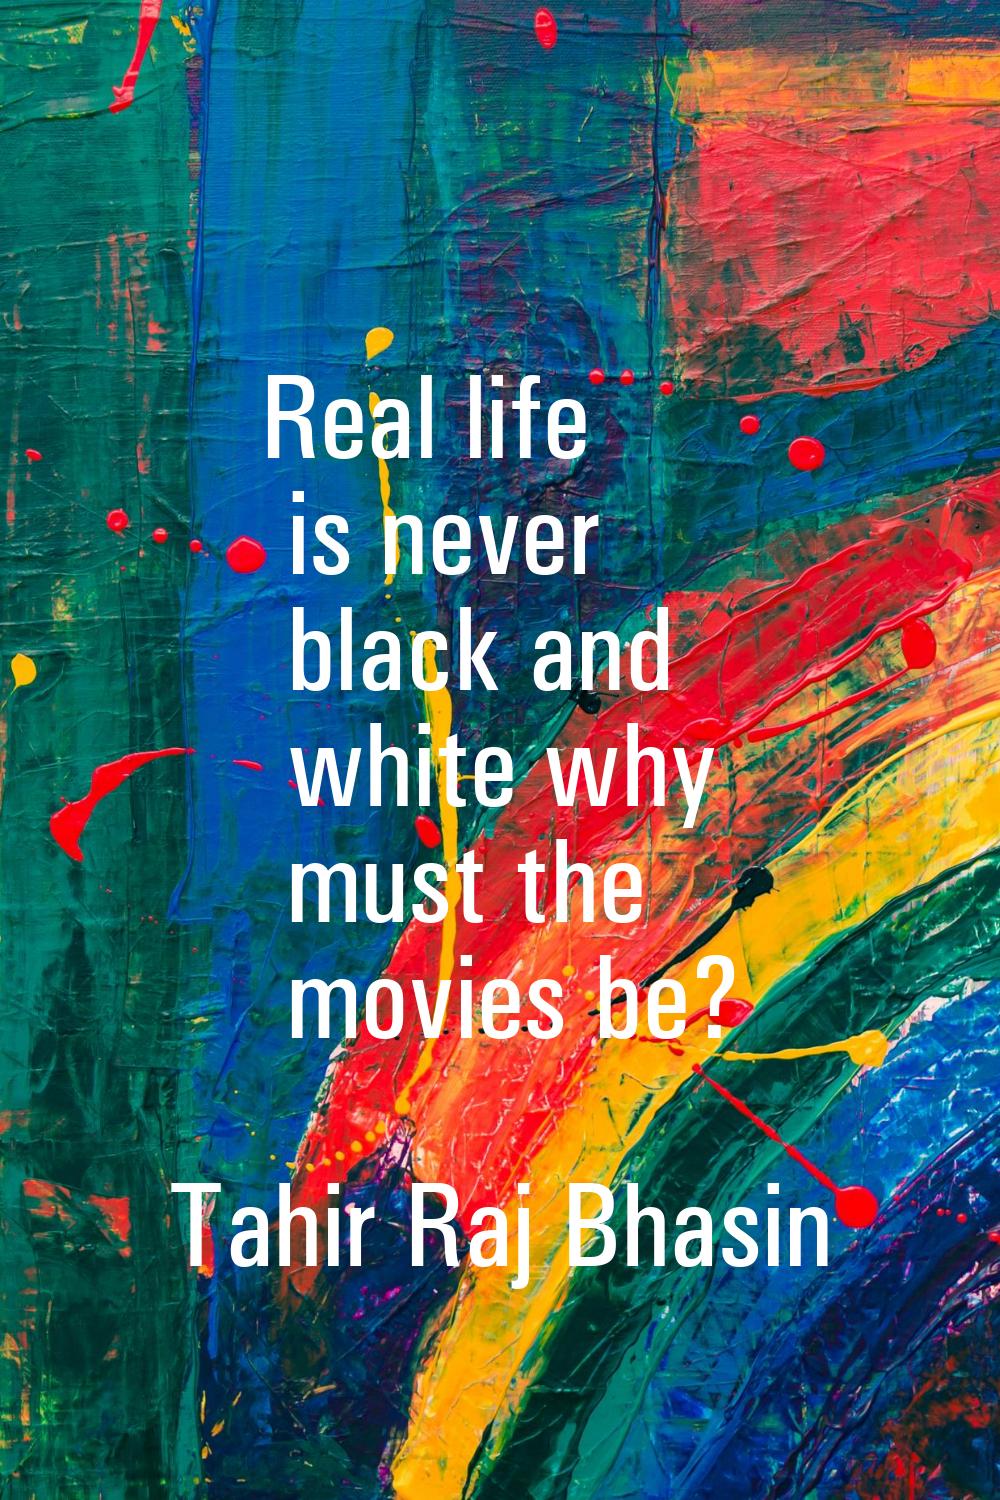 Real life is never black and white why must the movies be?